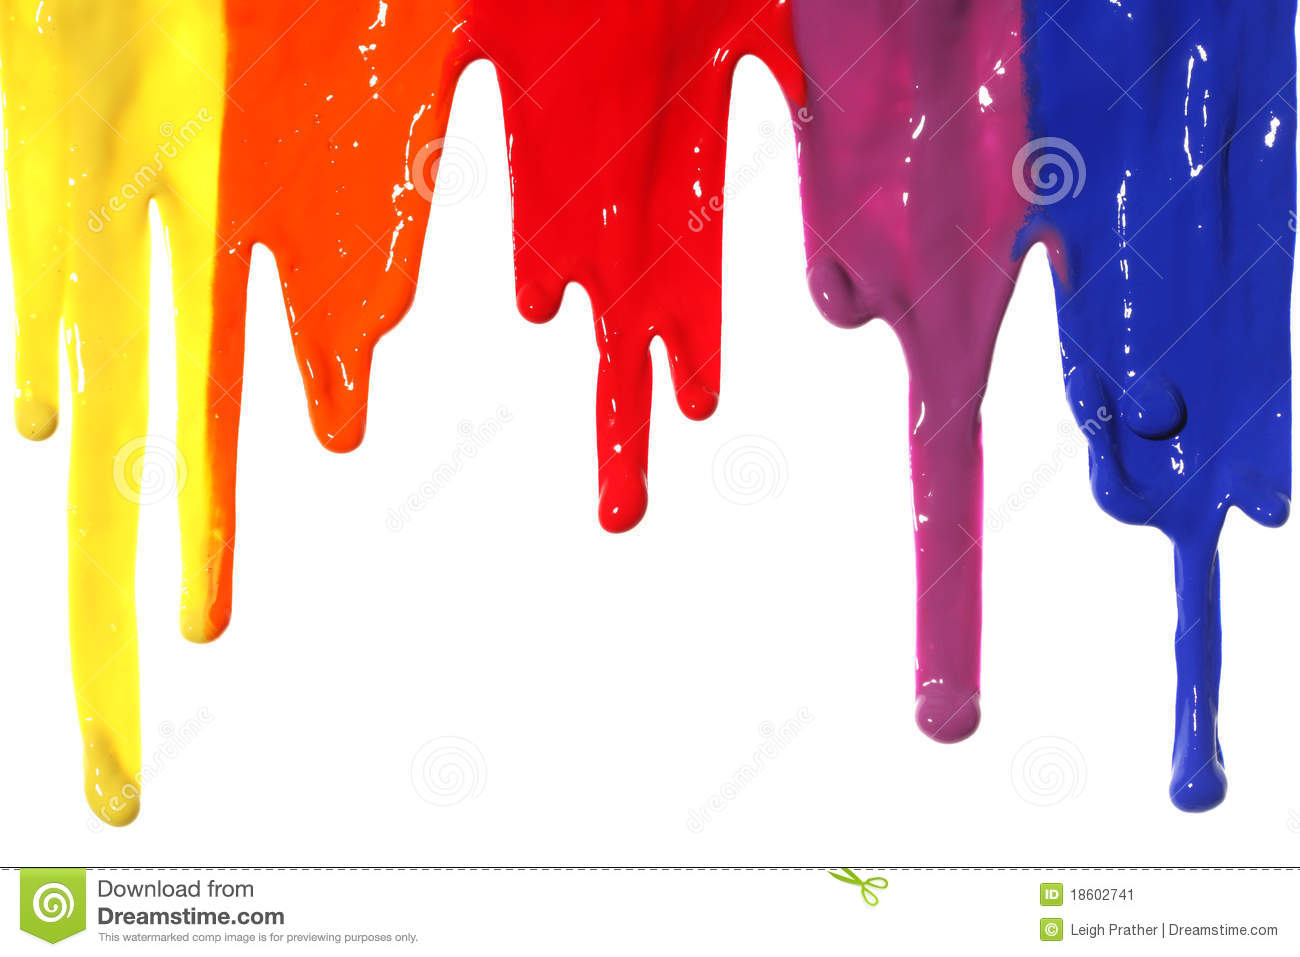 Paint Dripping Stock Image   Image  18602741